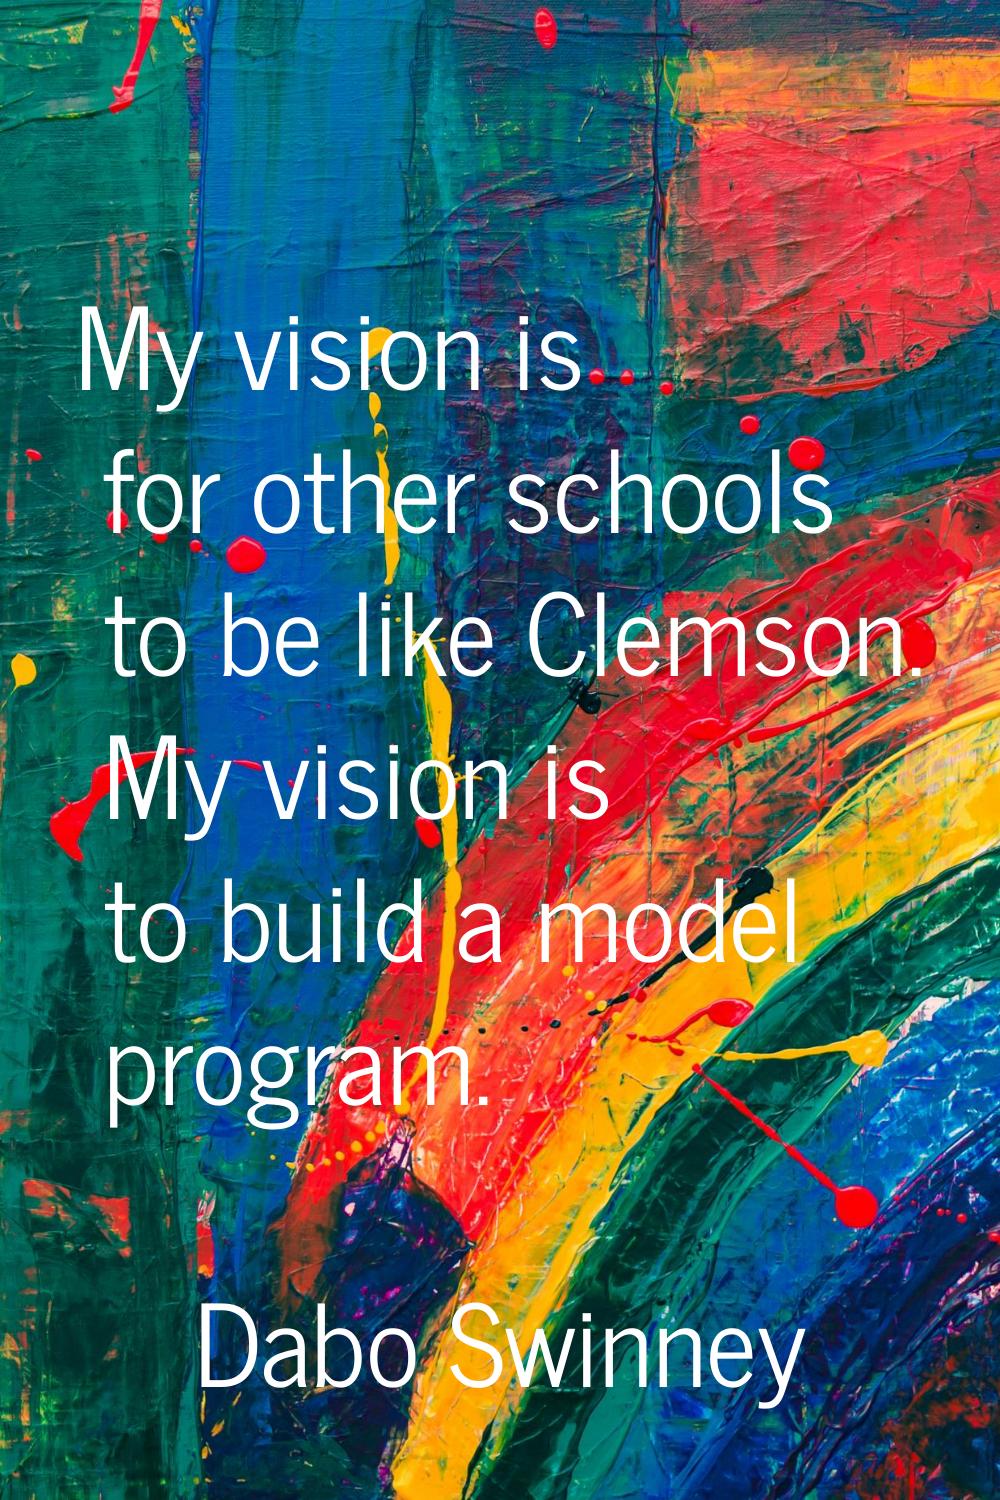 My vision is for other schools to be like Clemson. My vision is to build a model program.